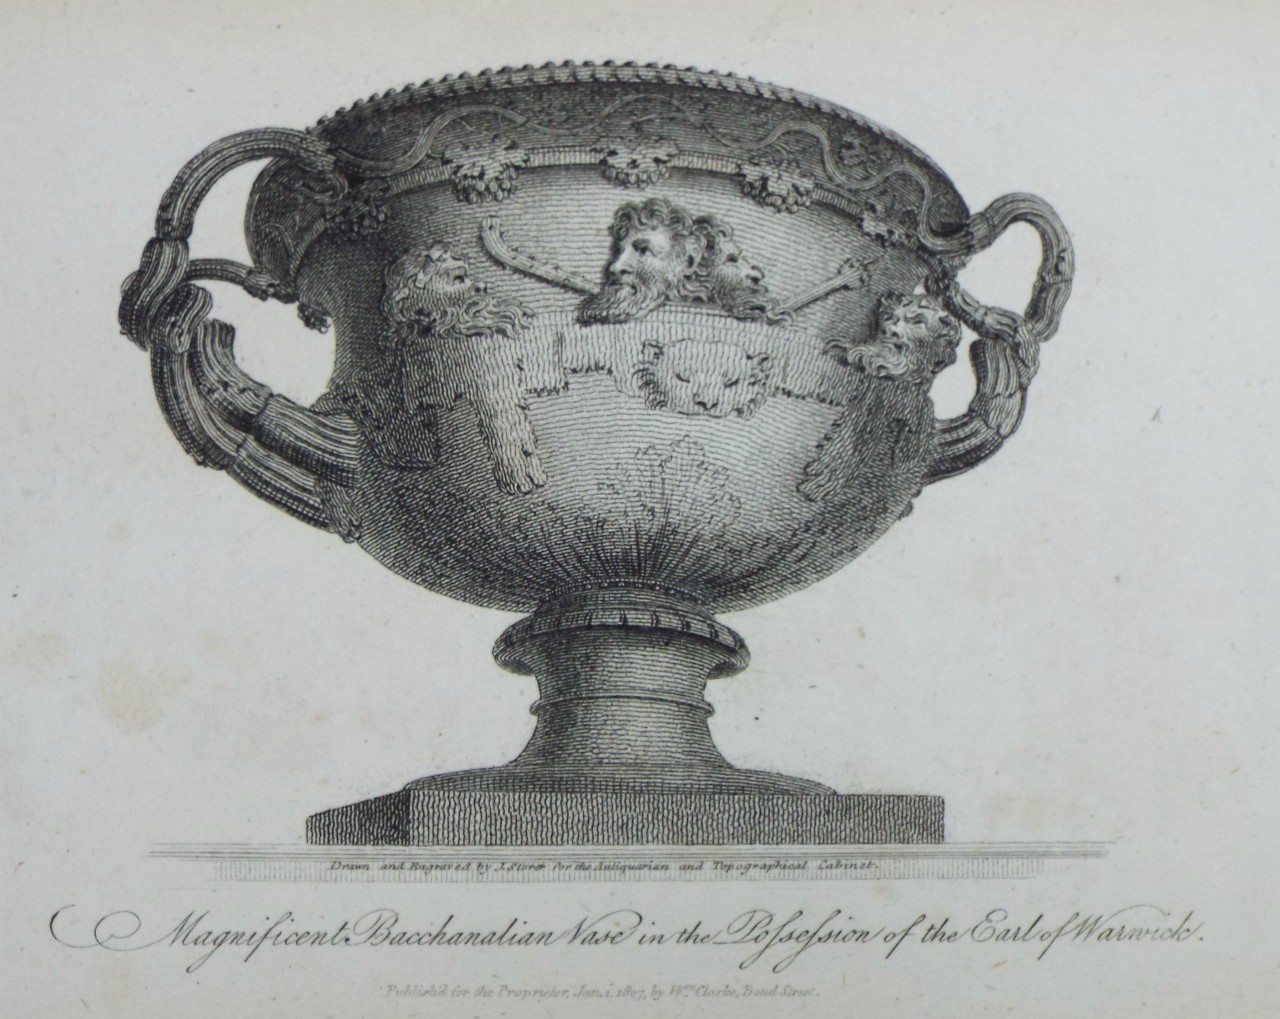 Print - Magnificent Bacchanalian Vase in the Possession of the Earl of Warwick. - Storer